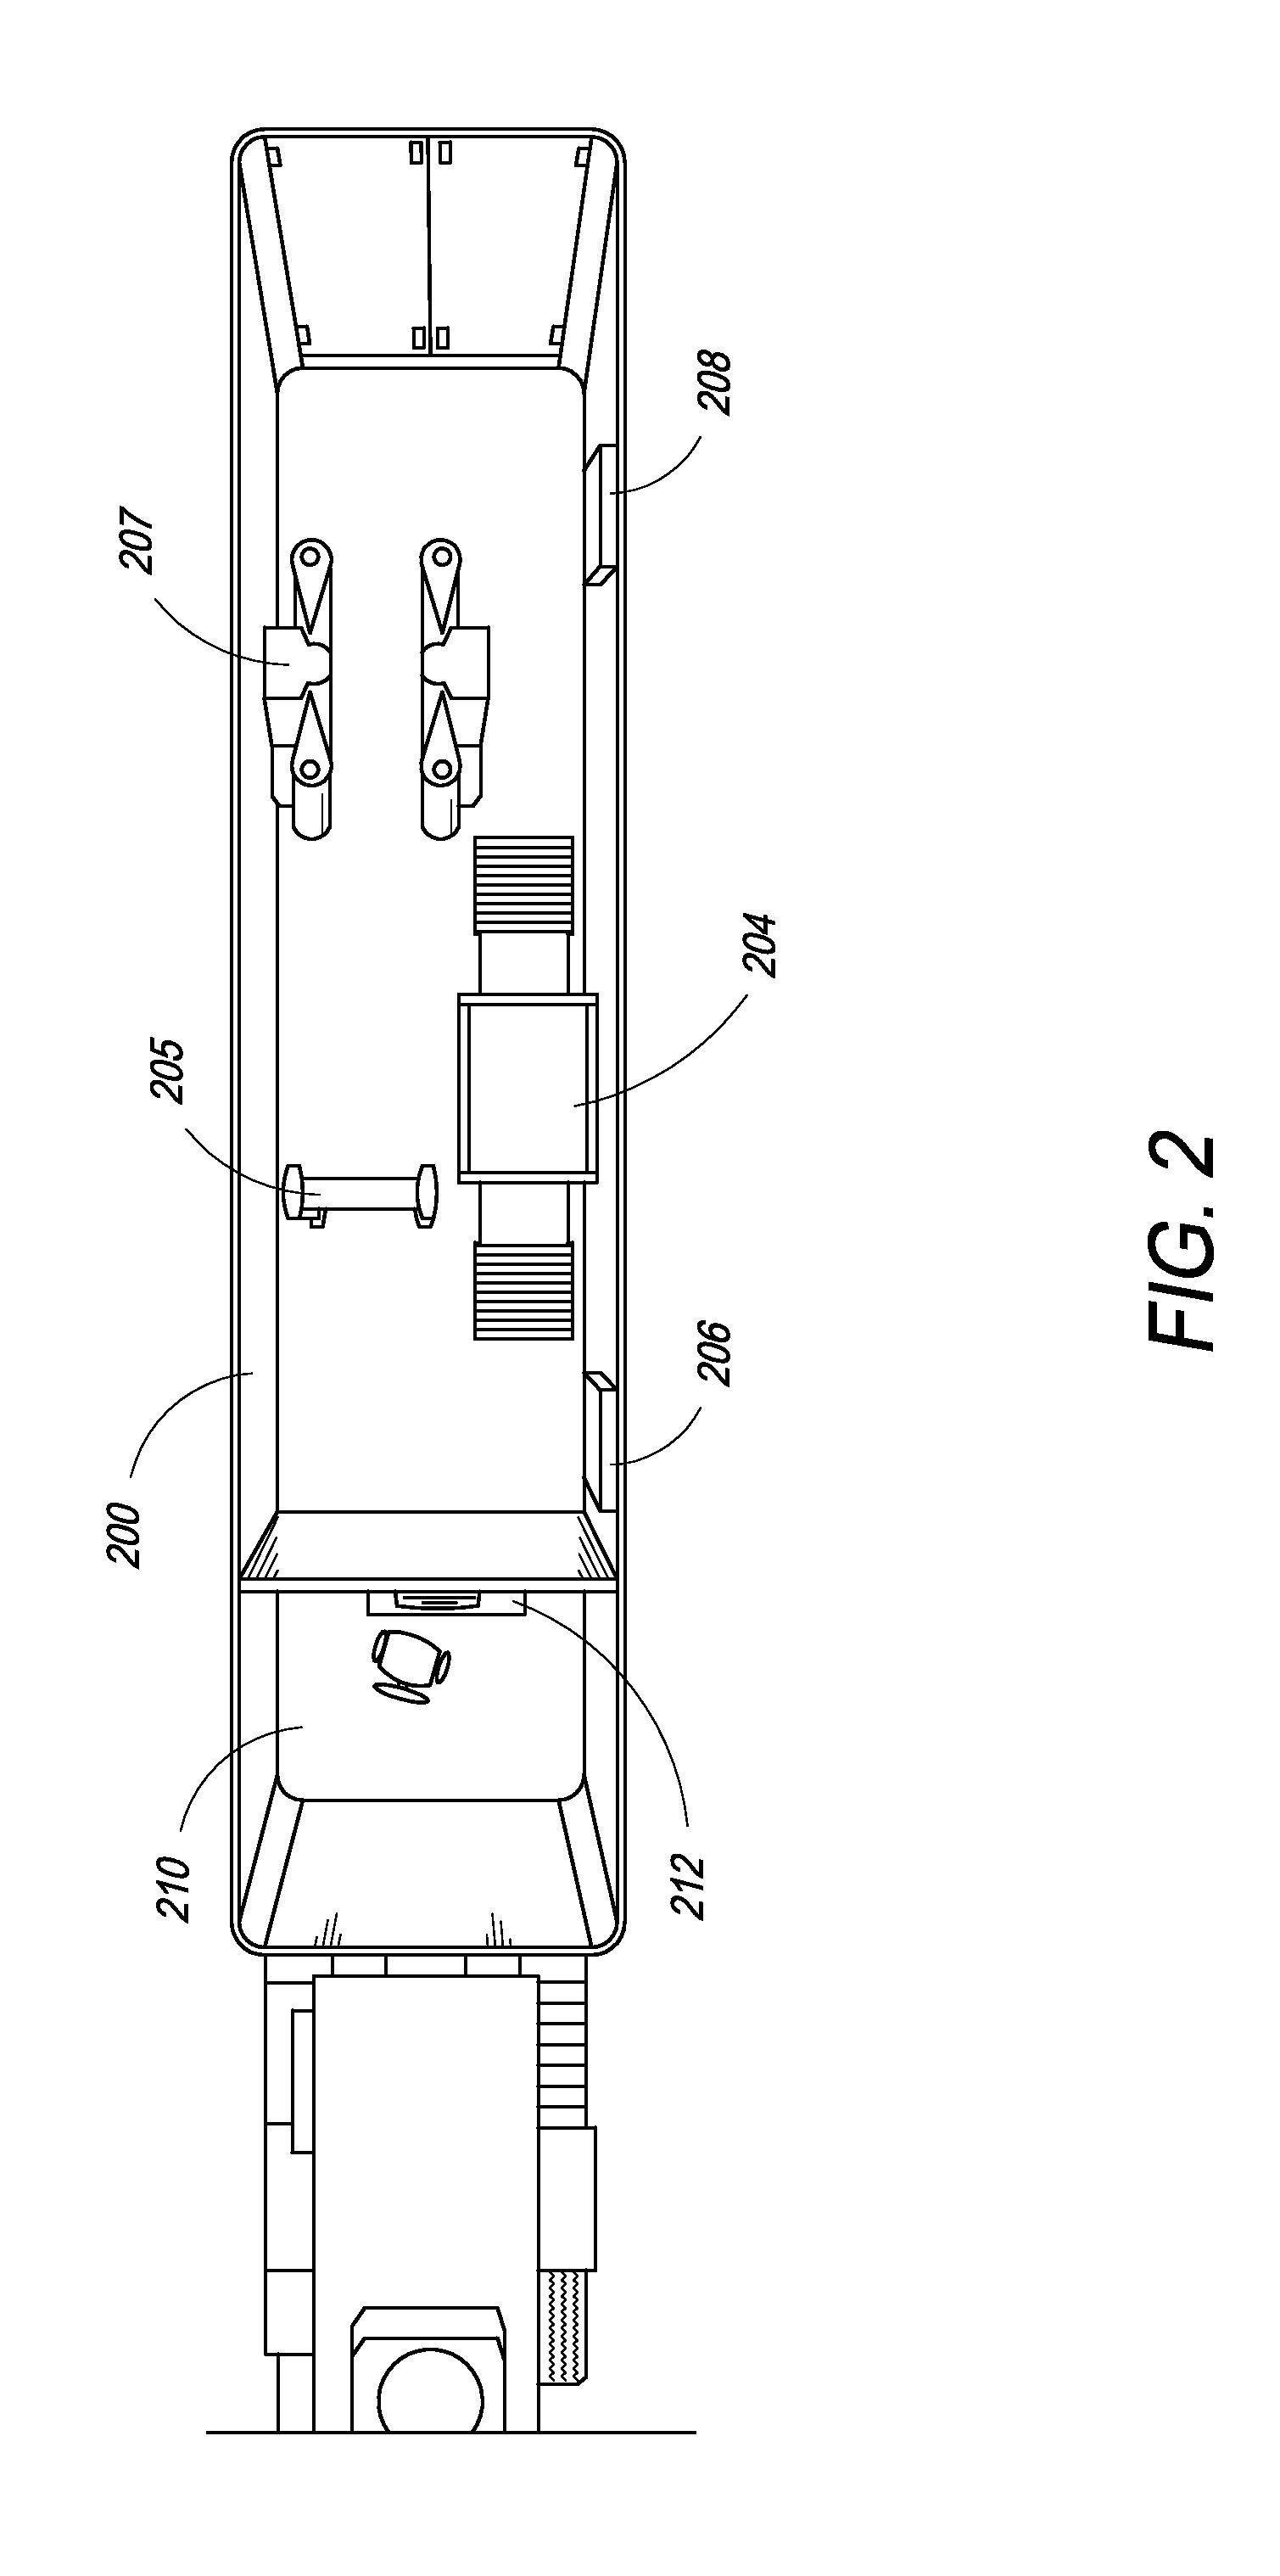 Integrated portable checkpoint system